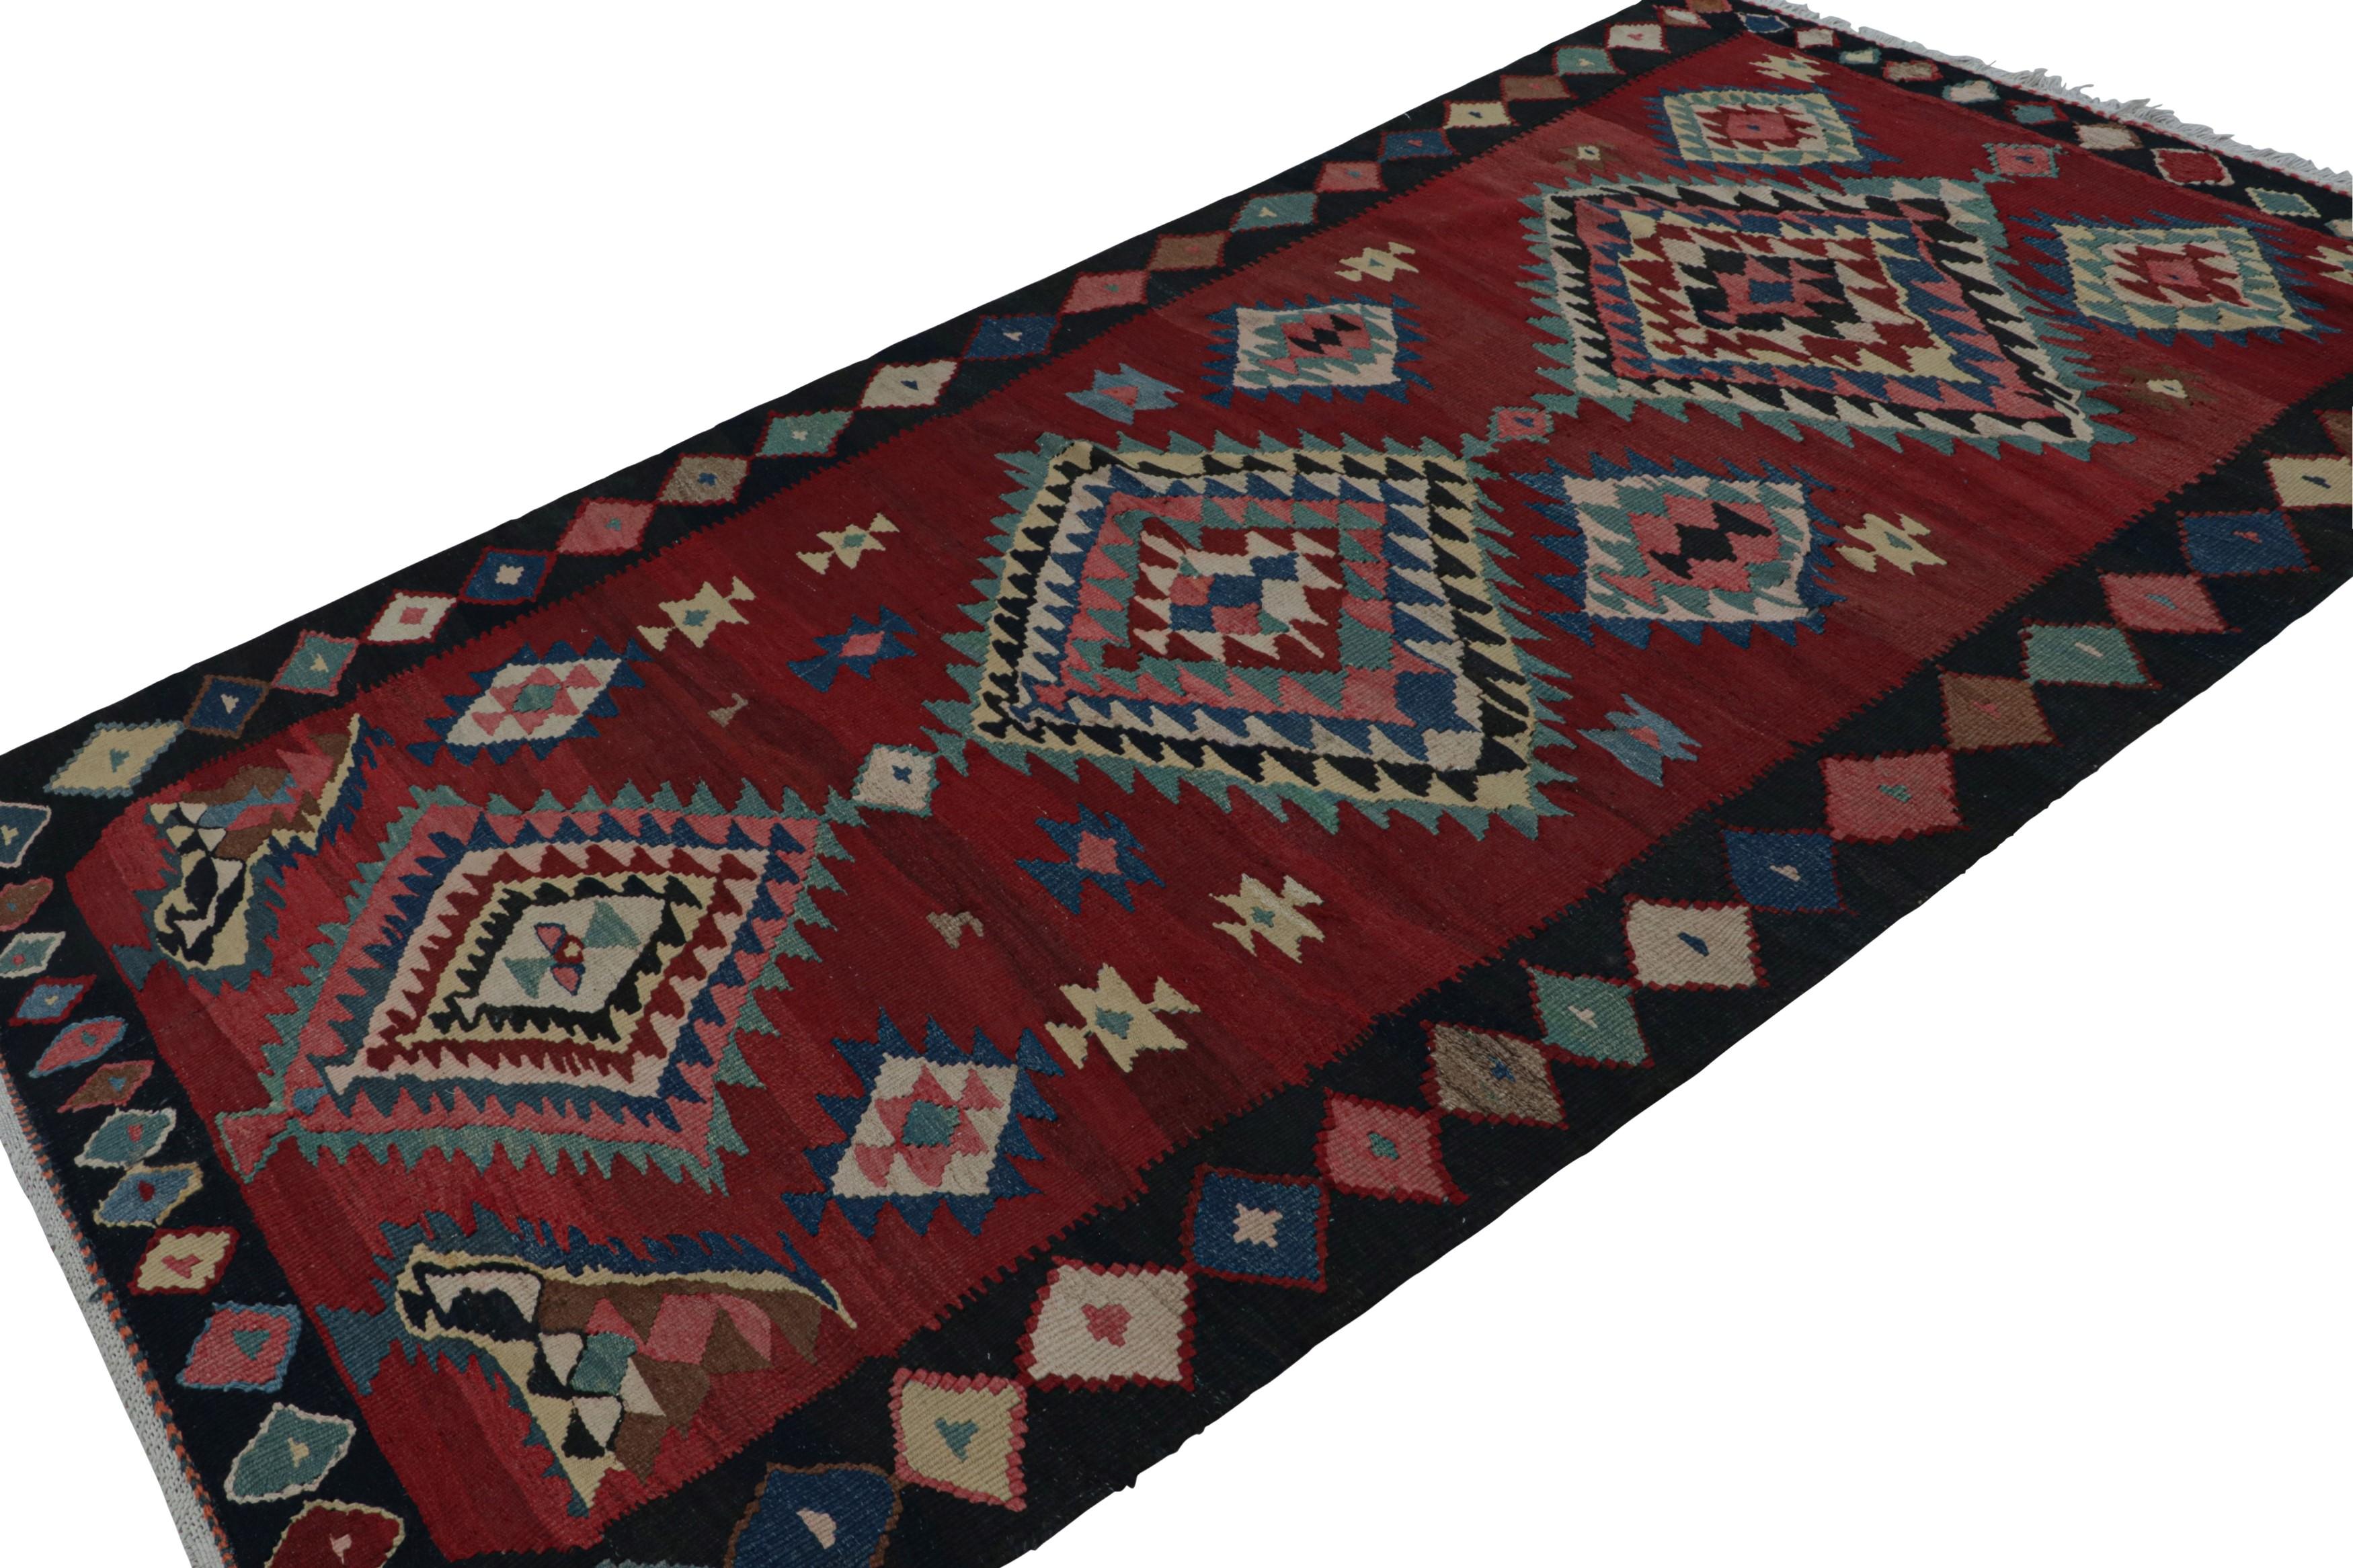 Handwoven in wool, circa 1950-1960, this 5x9 vintage tribal Afghan kilim rug features vibrant medallions and geometric patterns in blue, green and beige/brown, on a red field, and a blue border. 

On the Design:

A special piece in the Rug & Kilim